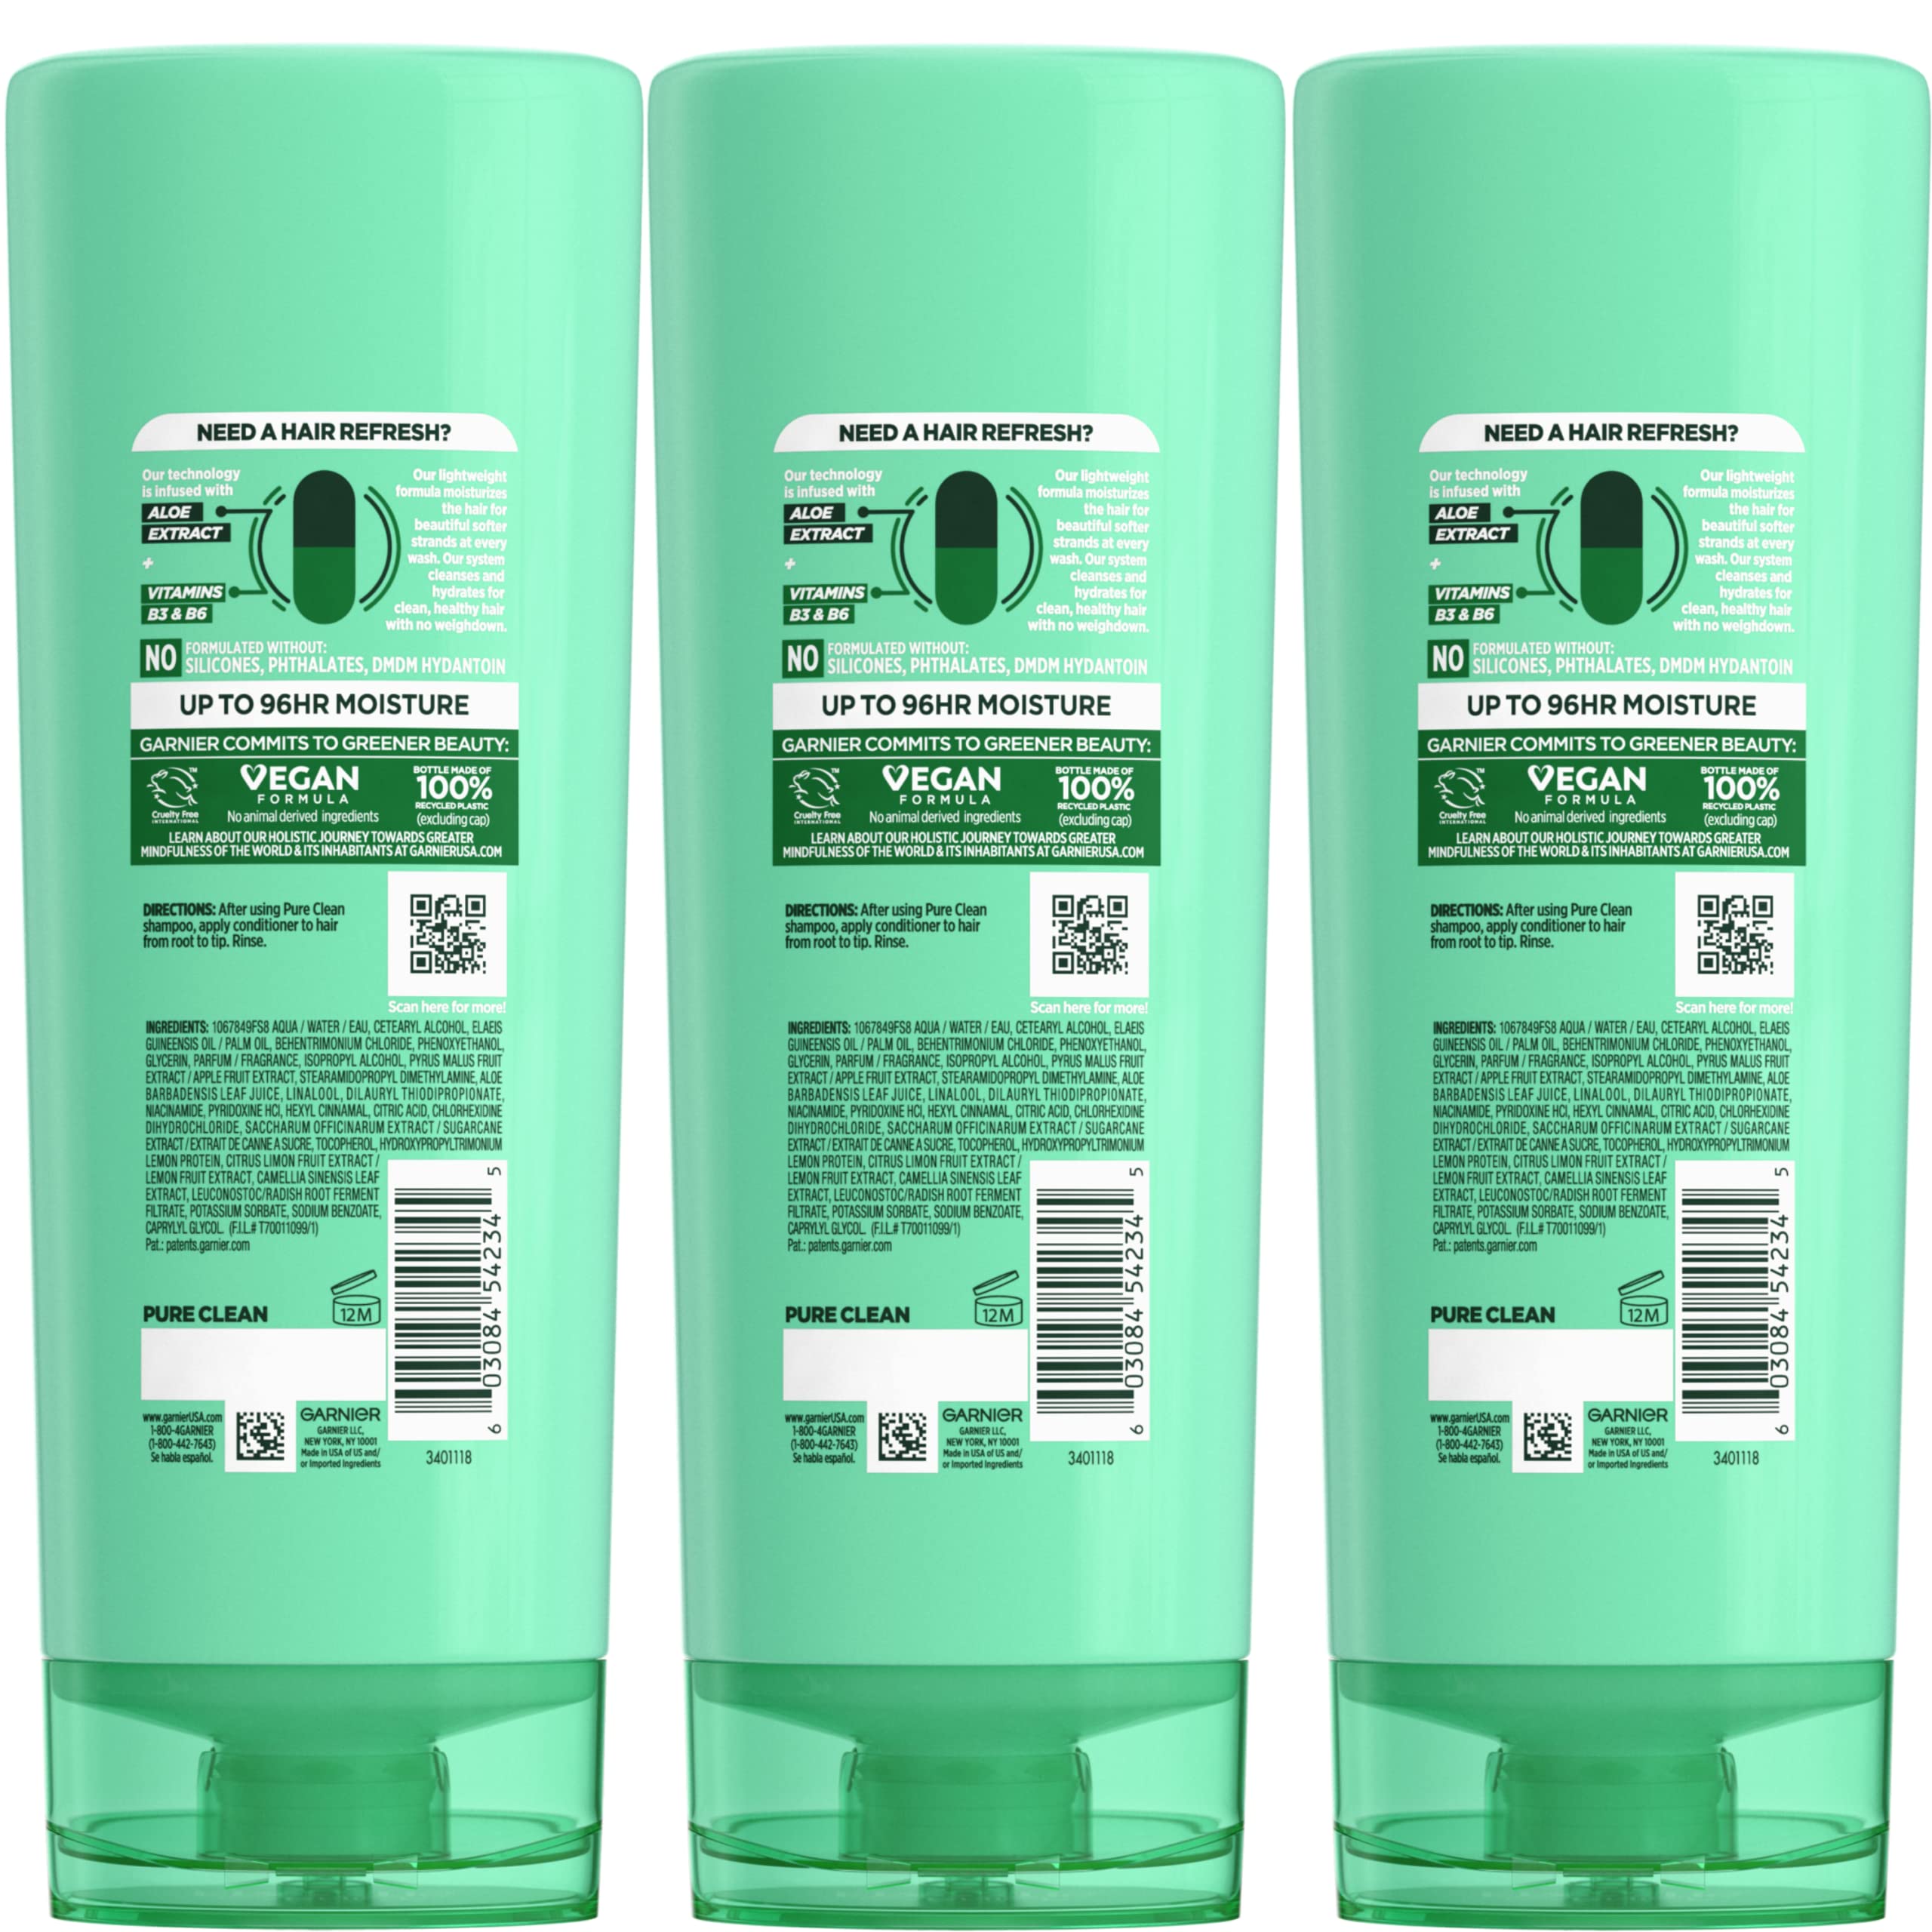 Garnier Fructis Pure Clean Hydrating Conditioner, 12 Fl Oz, 3 Count (Packaging May Vary)